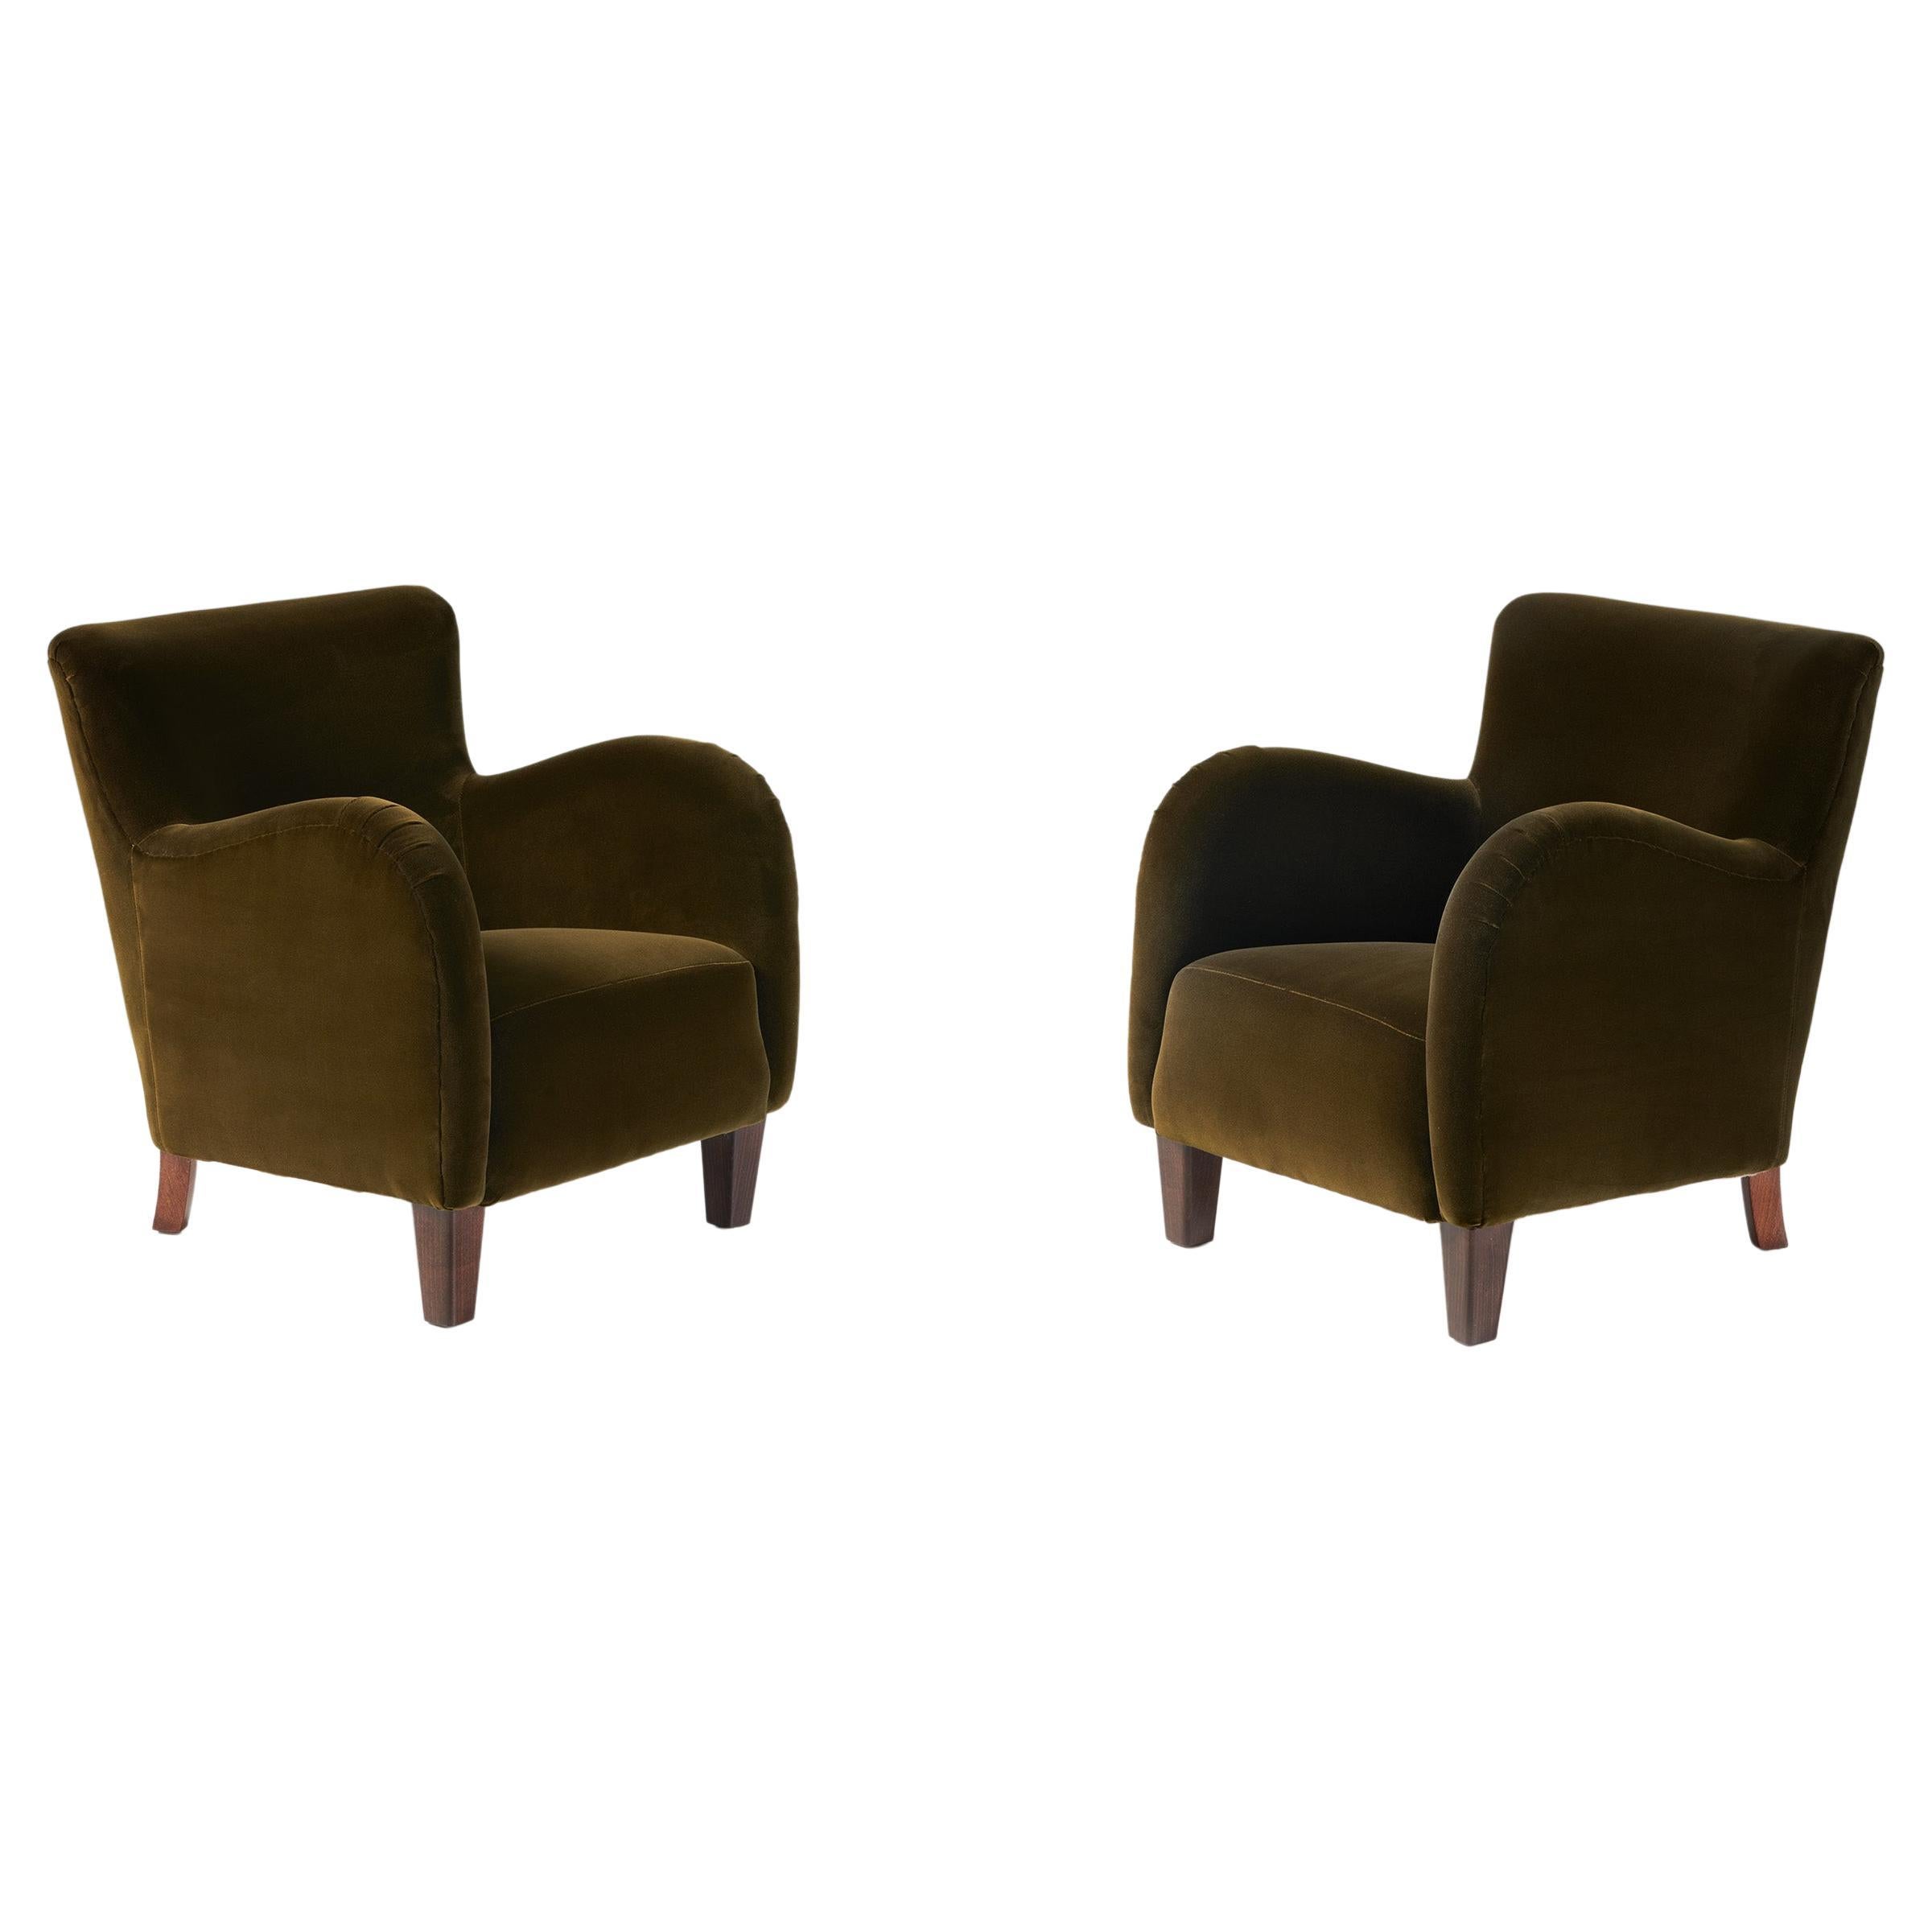 Pair of Vintage Danish 1940s Velvet Lounge Chairs For Sale